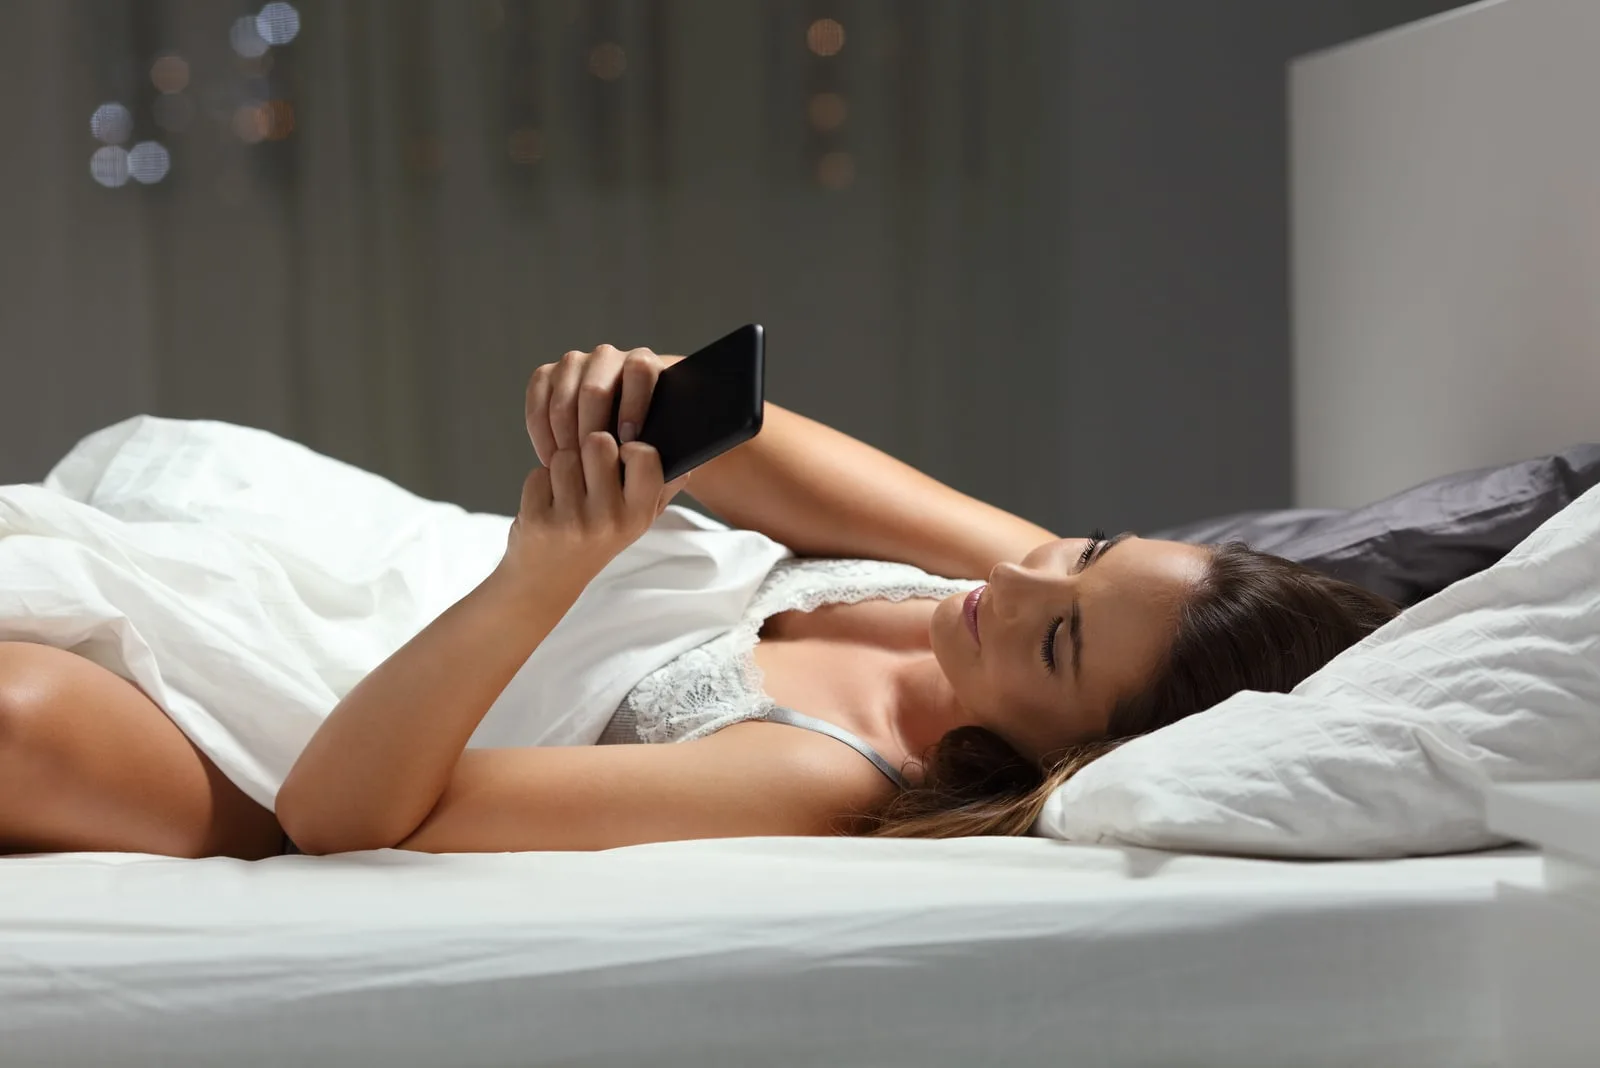 brunette lying in the bedroom bed and using a cell phone